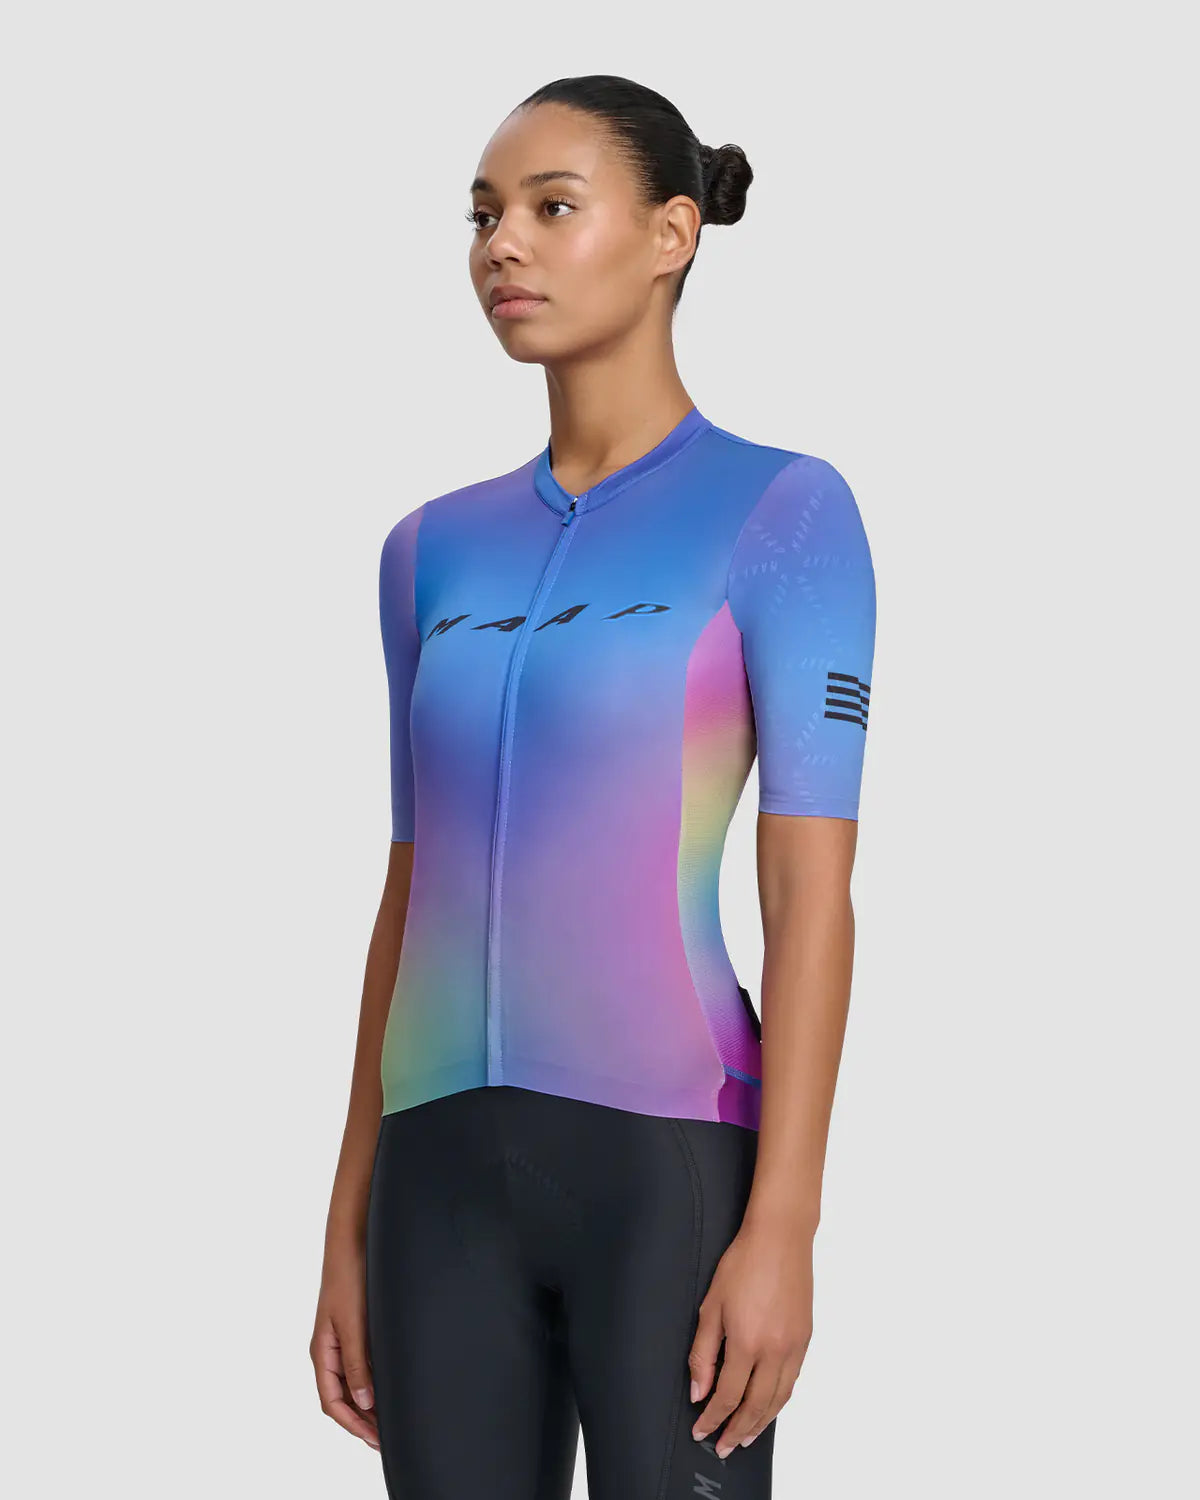 MAAP Women&#39;s Blurred Out Pro Hex 2.0 Blue Mix レディースサイクルジャージ | CYCLISMMAAP Women&#39;s Blurred Out Pro Hex 2.0 Blue Mix レディースサイクルジャージ | CYCLISM